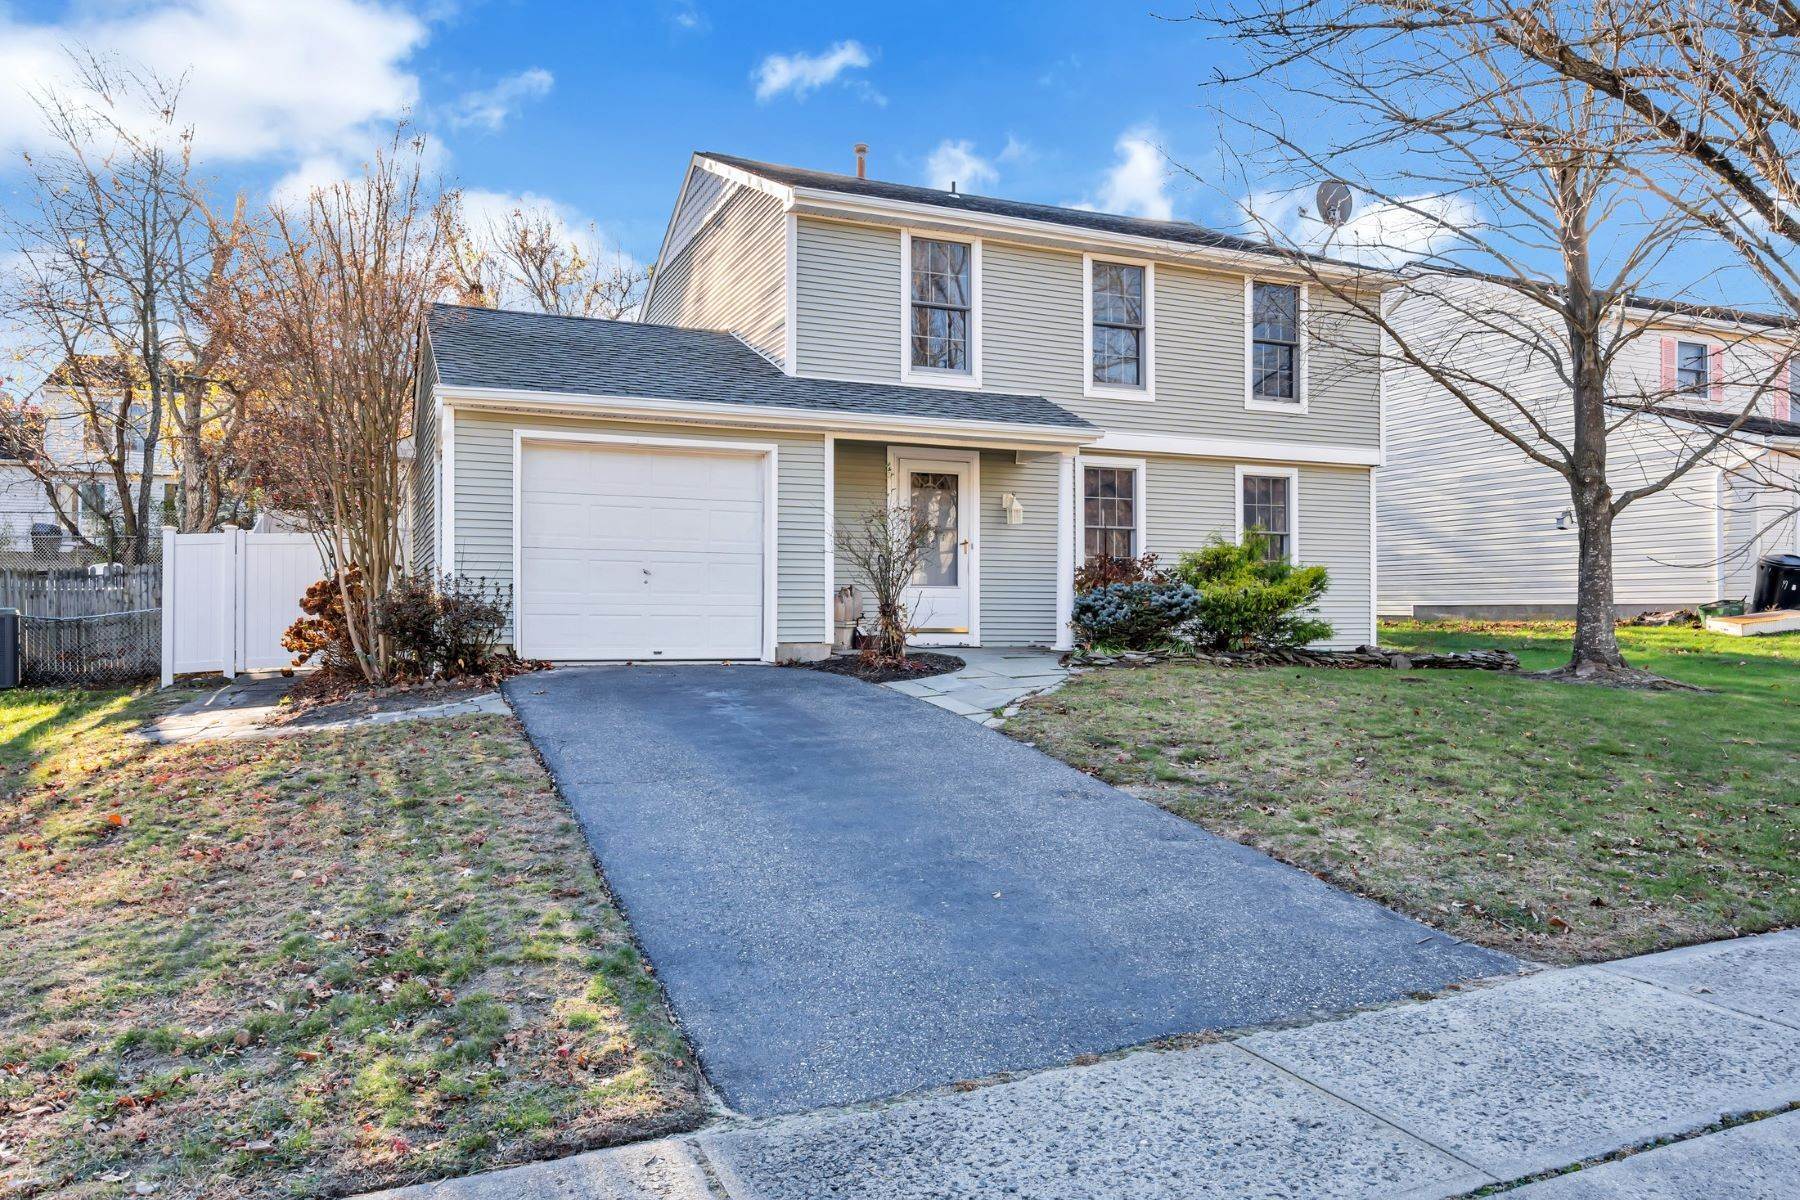 5. Single Family Homes for Sale at Settlers Landing Section of Barnegat 19 Bayside Avenue Barnegat, New Jersey 08005 United States